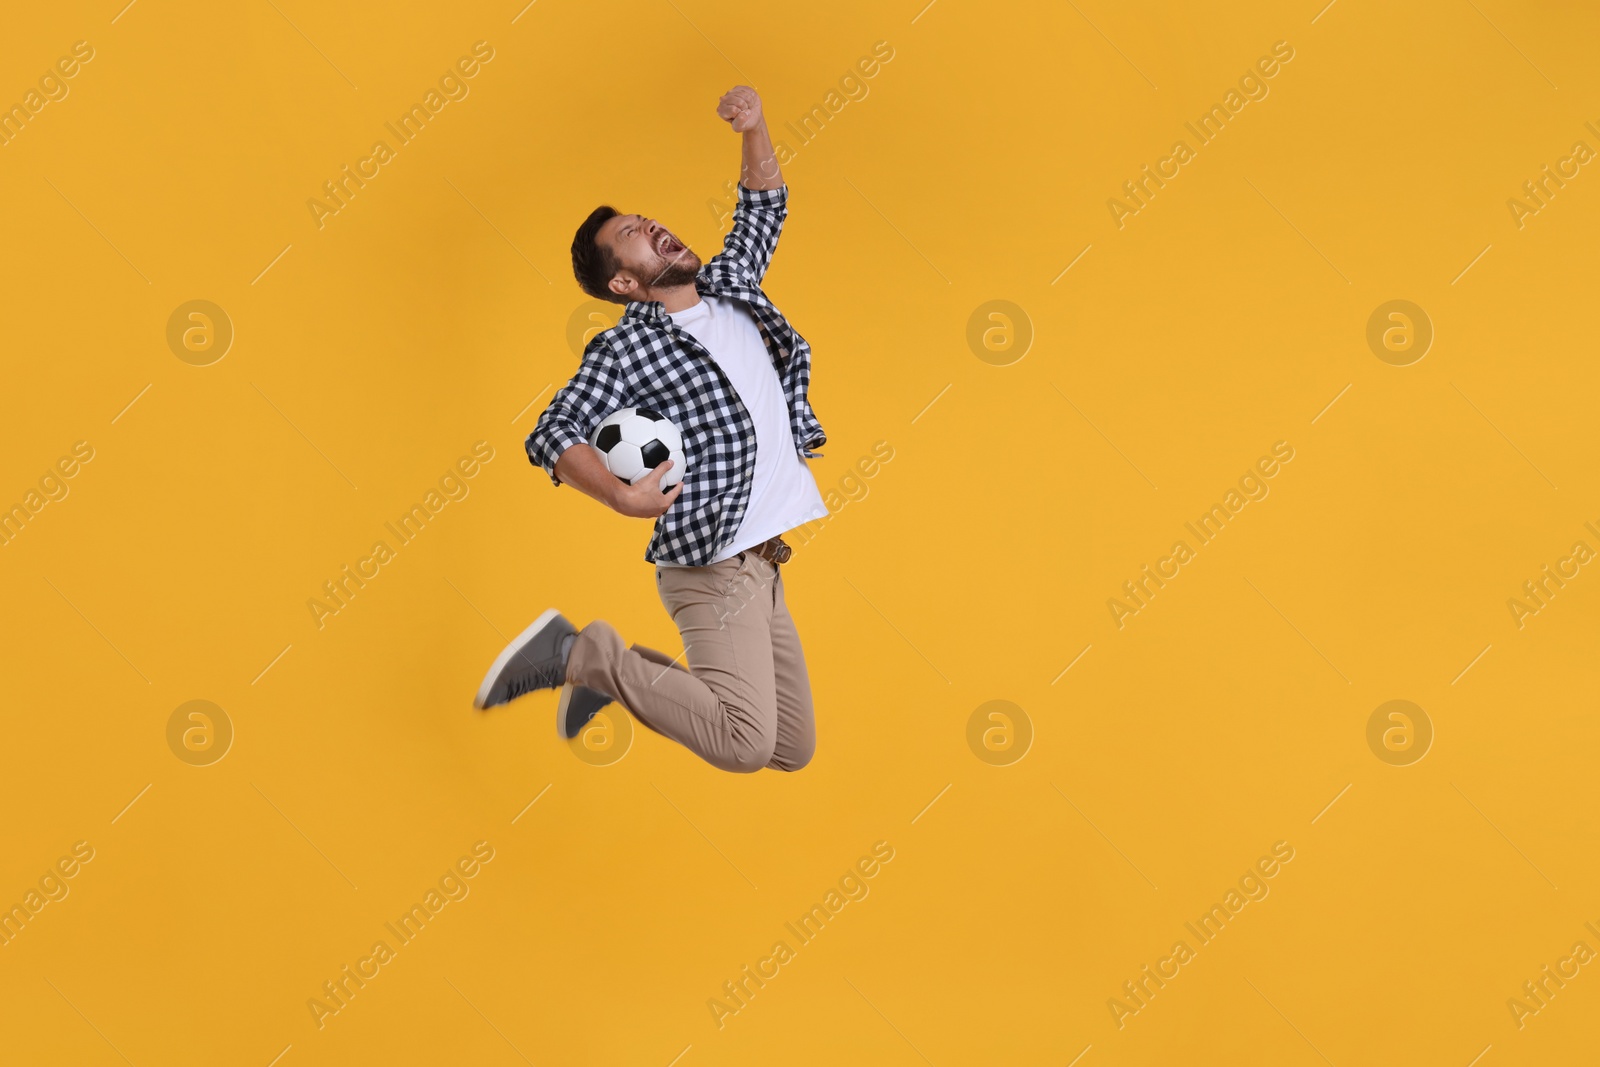 Photo of Emotional sports fan with ball jumping on yellow background. Space for text